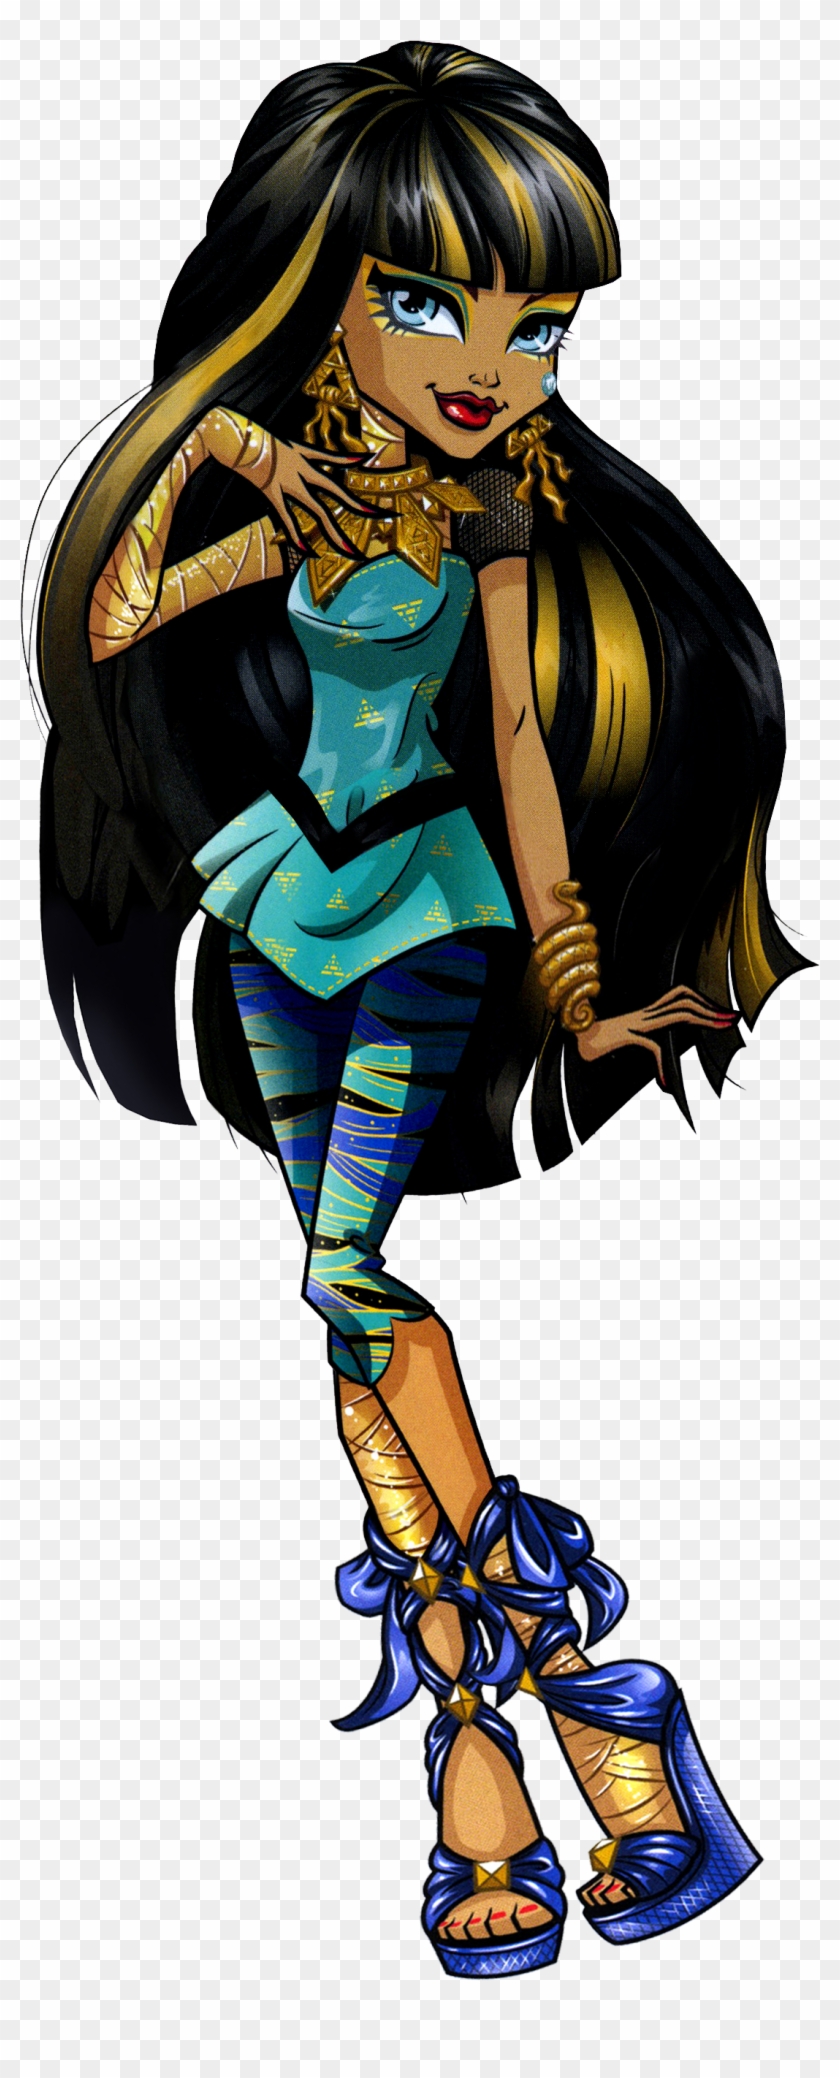 Monster High Cleo De Nile - Monster High Cleo De Nile Styles Clipart #3940838